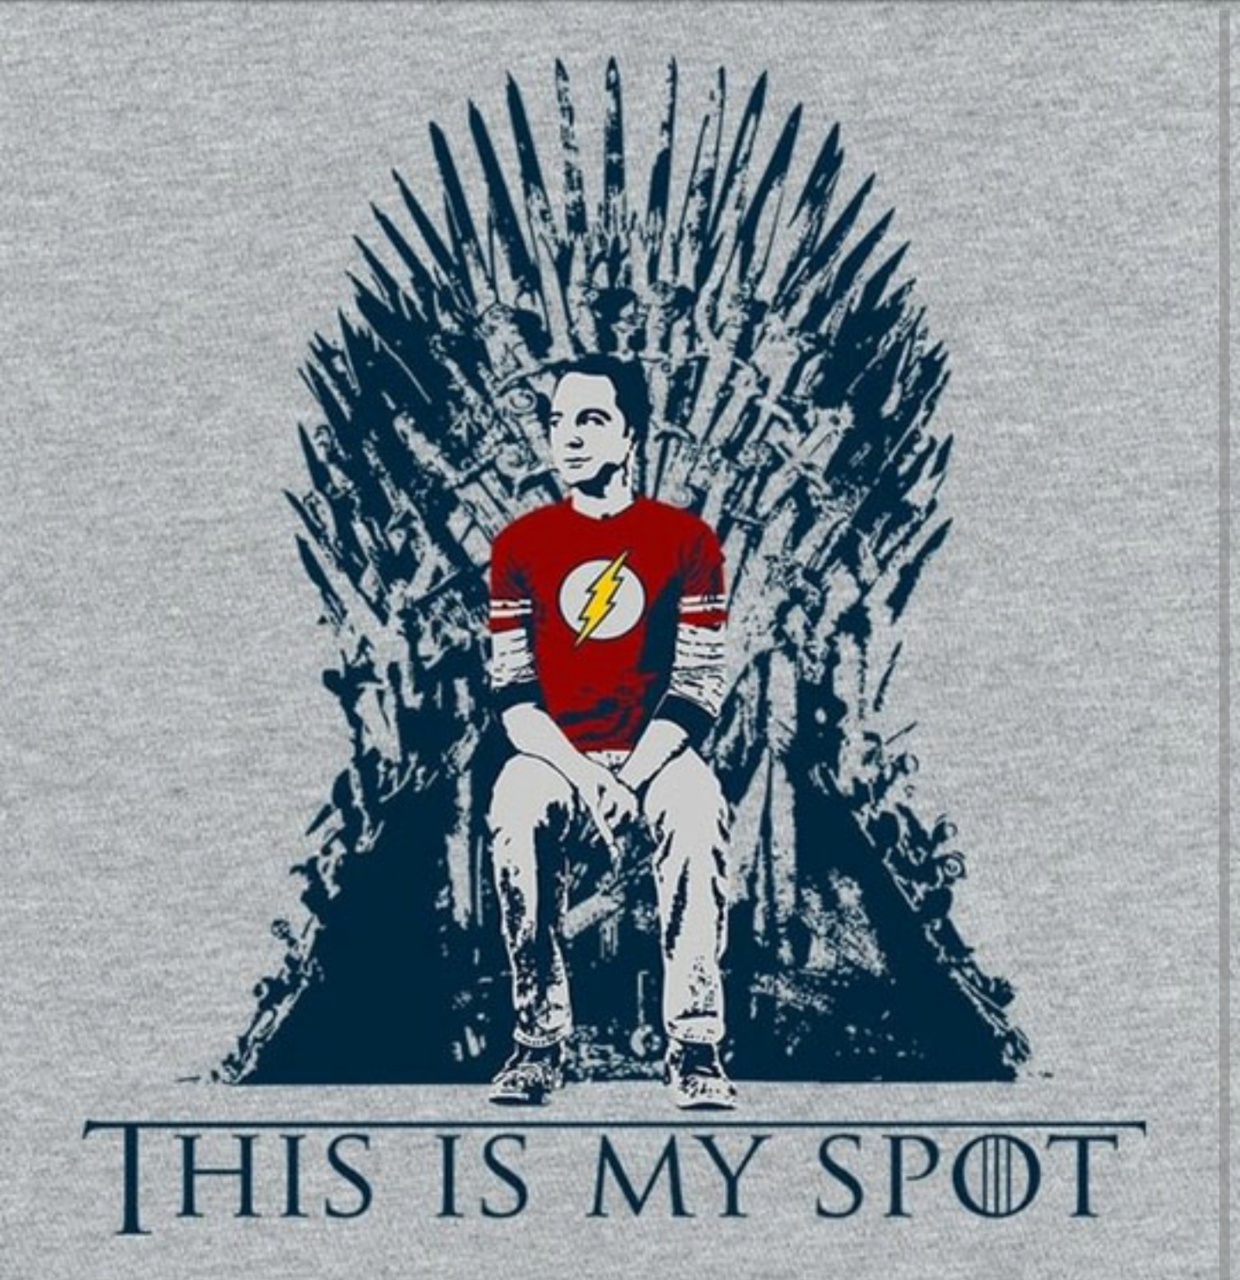 A Song Of Ice And Fire, Game Of Thrones And Got - Big Bang Theory T Shirt Designs - HD Wallpaper 